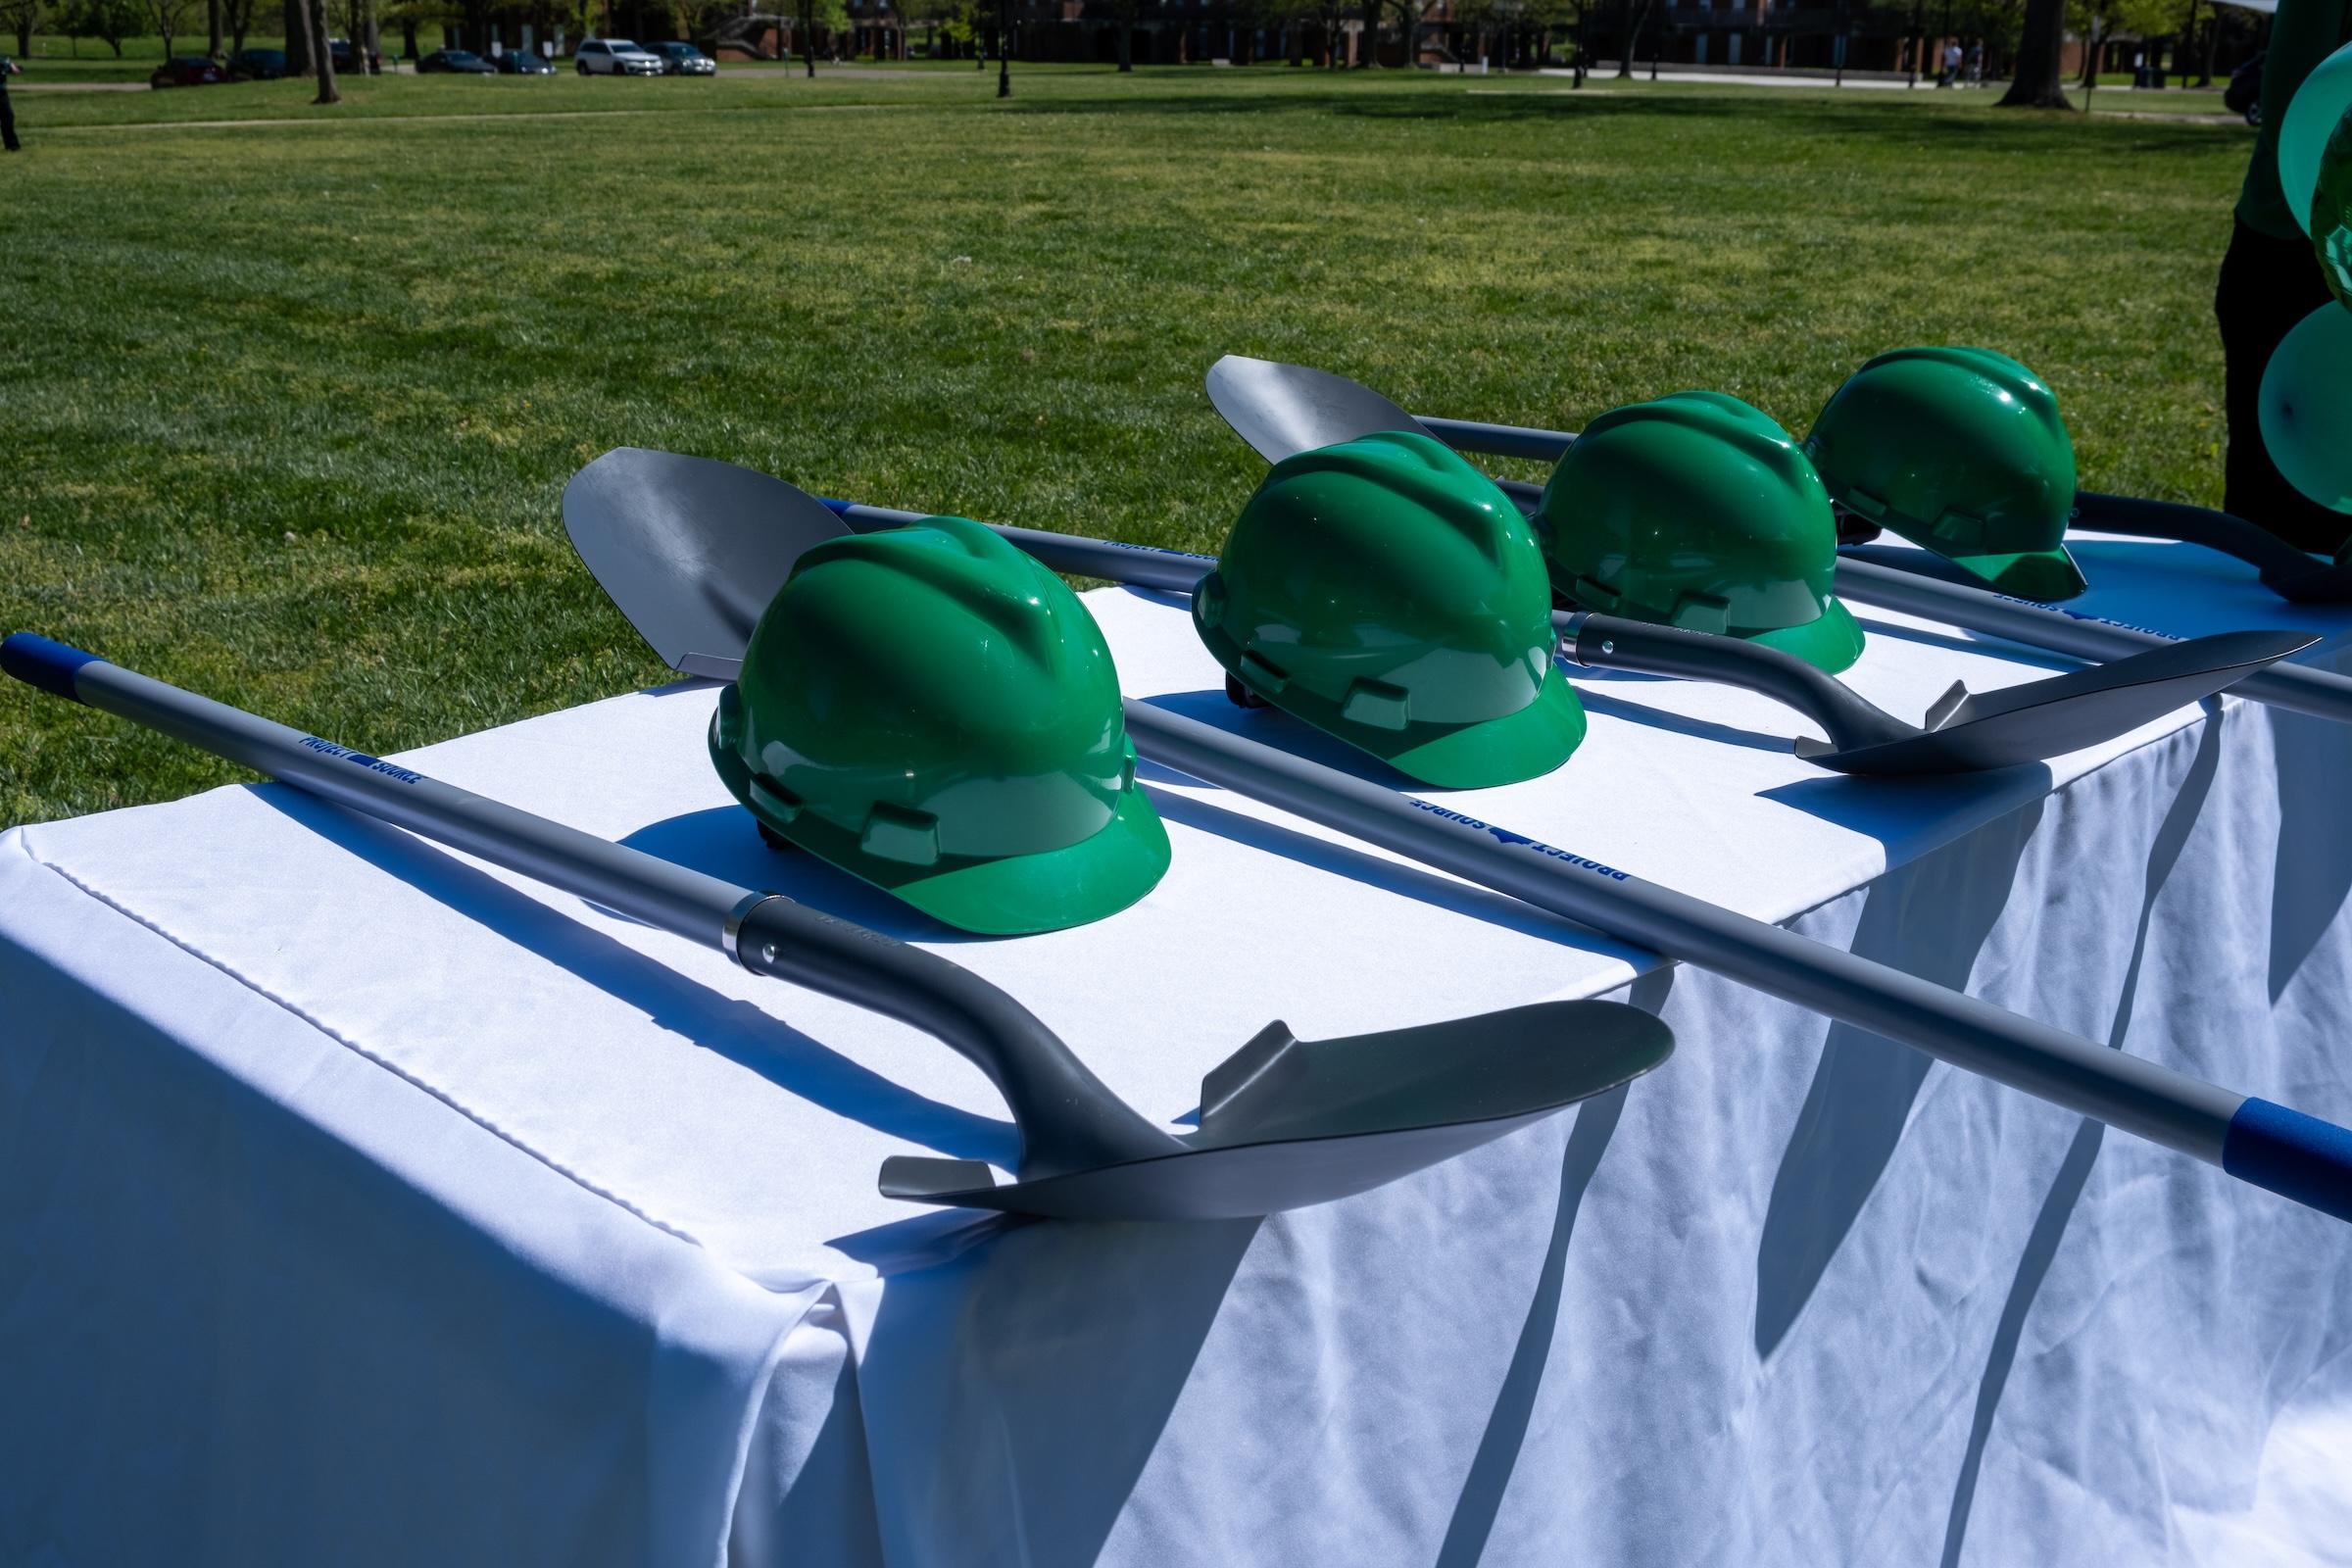 hard hats and shovels on a table